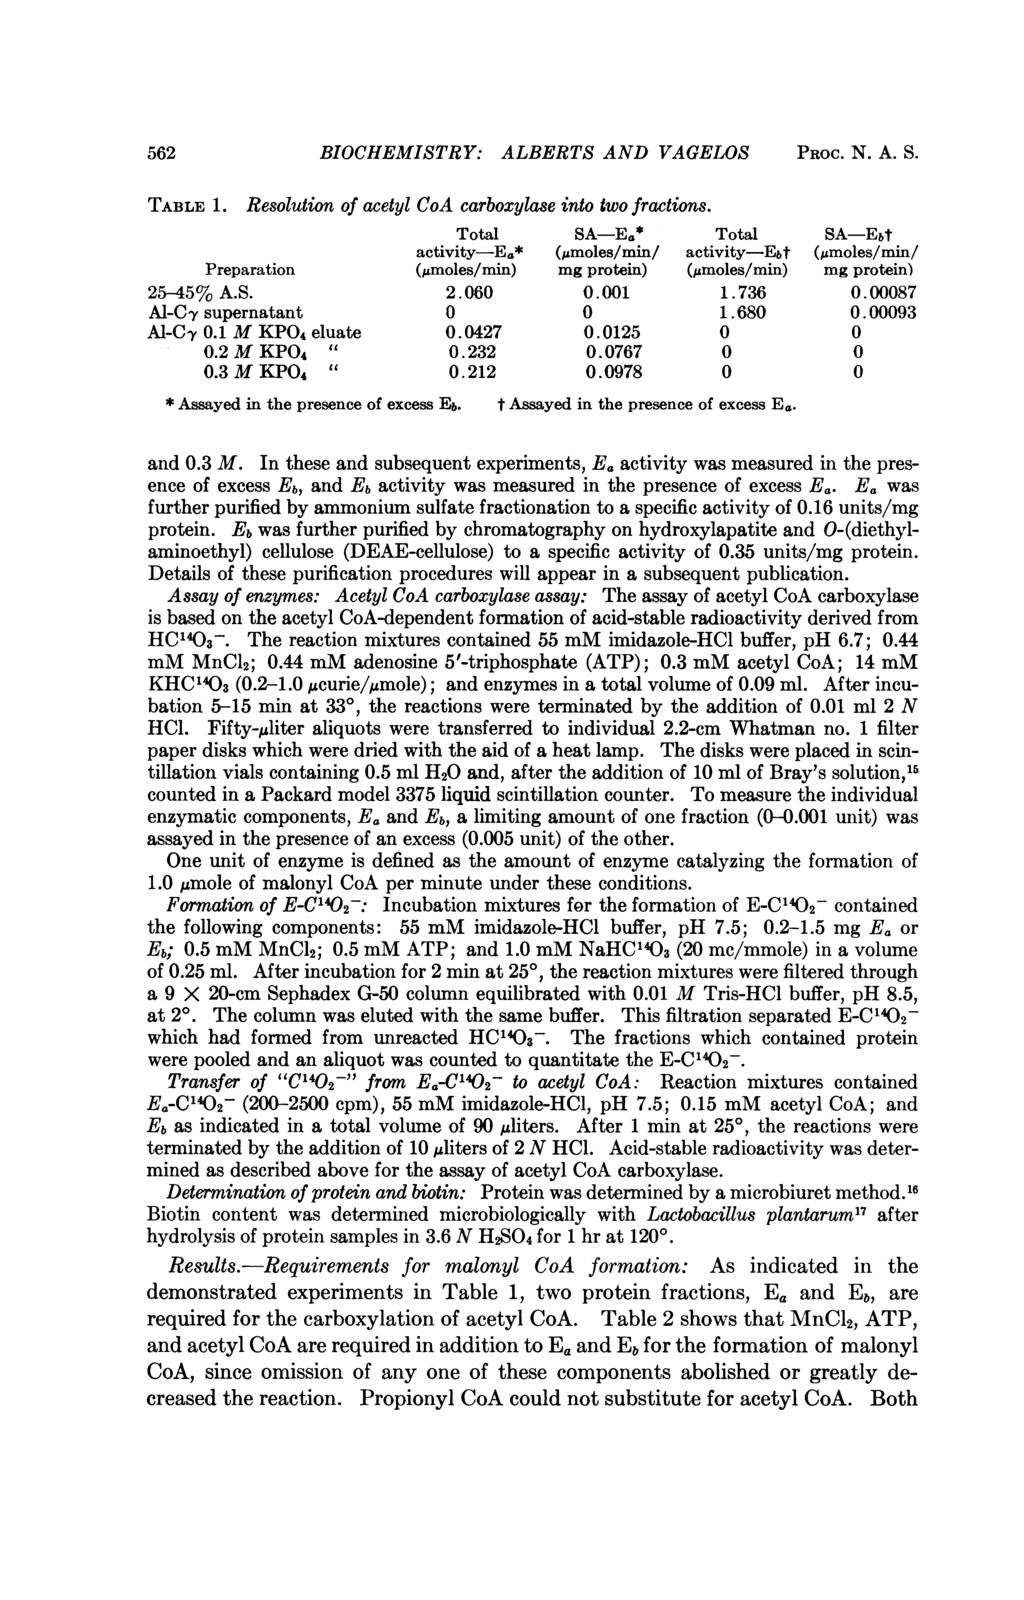 562562BIOCHEMISTRY: ALBERTS AND VAGELOS PROC. N. A. TABLE 1. Resolution of acetyl CoA carboxylase into two fractions.